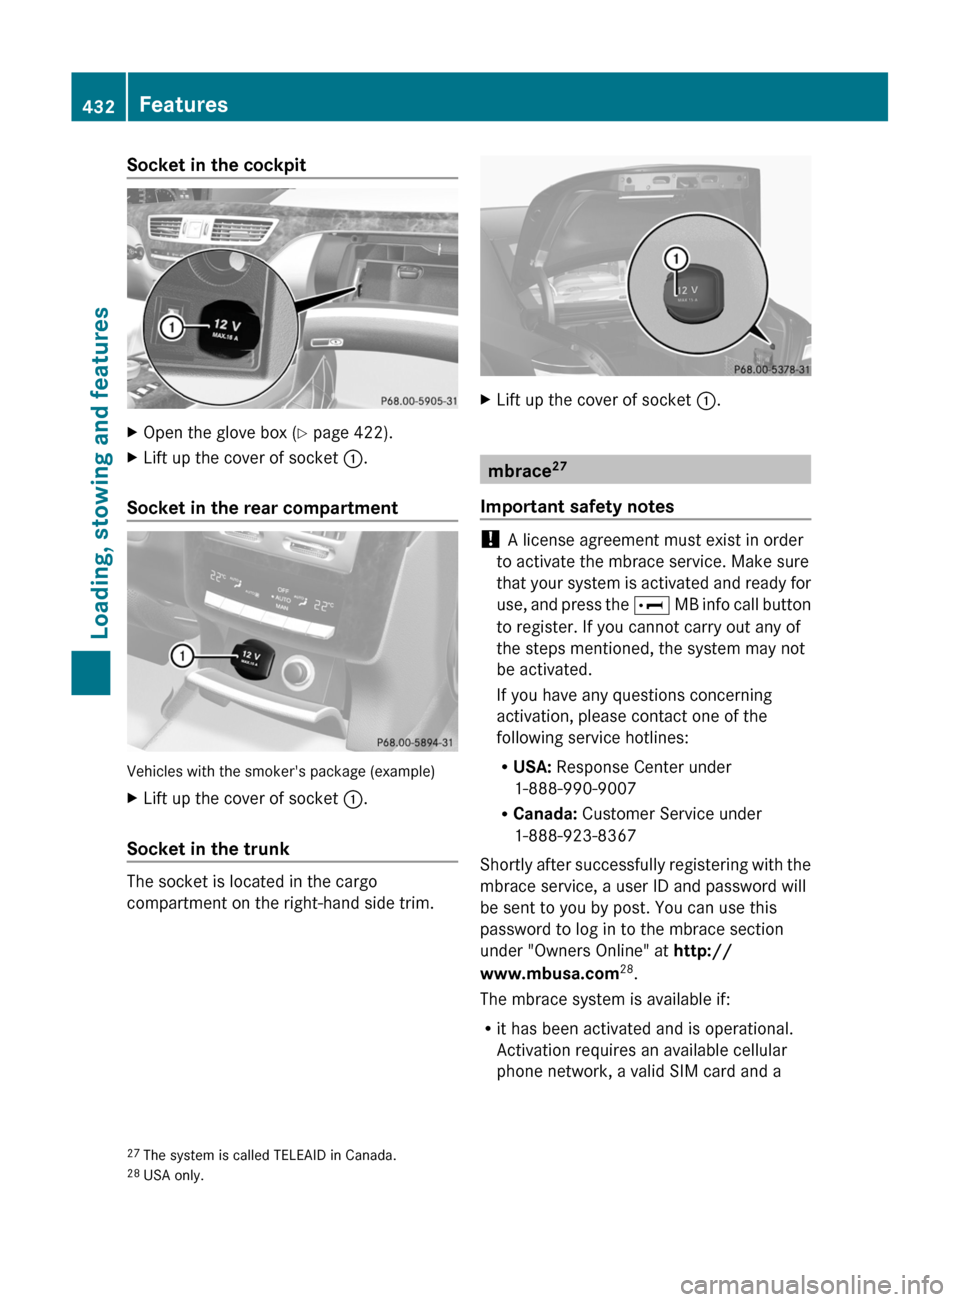 MERCEDES-BENZ S-Class 2011 W221 Owners Manual Socket in the cockpitXOpen the glove box (Y page 422).XLift up the cover of socket :.
Socket in the rear compartment
Vehicles with the smokers package (example)
XLift up the cover of socket :.
Socket